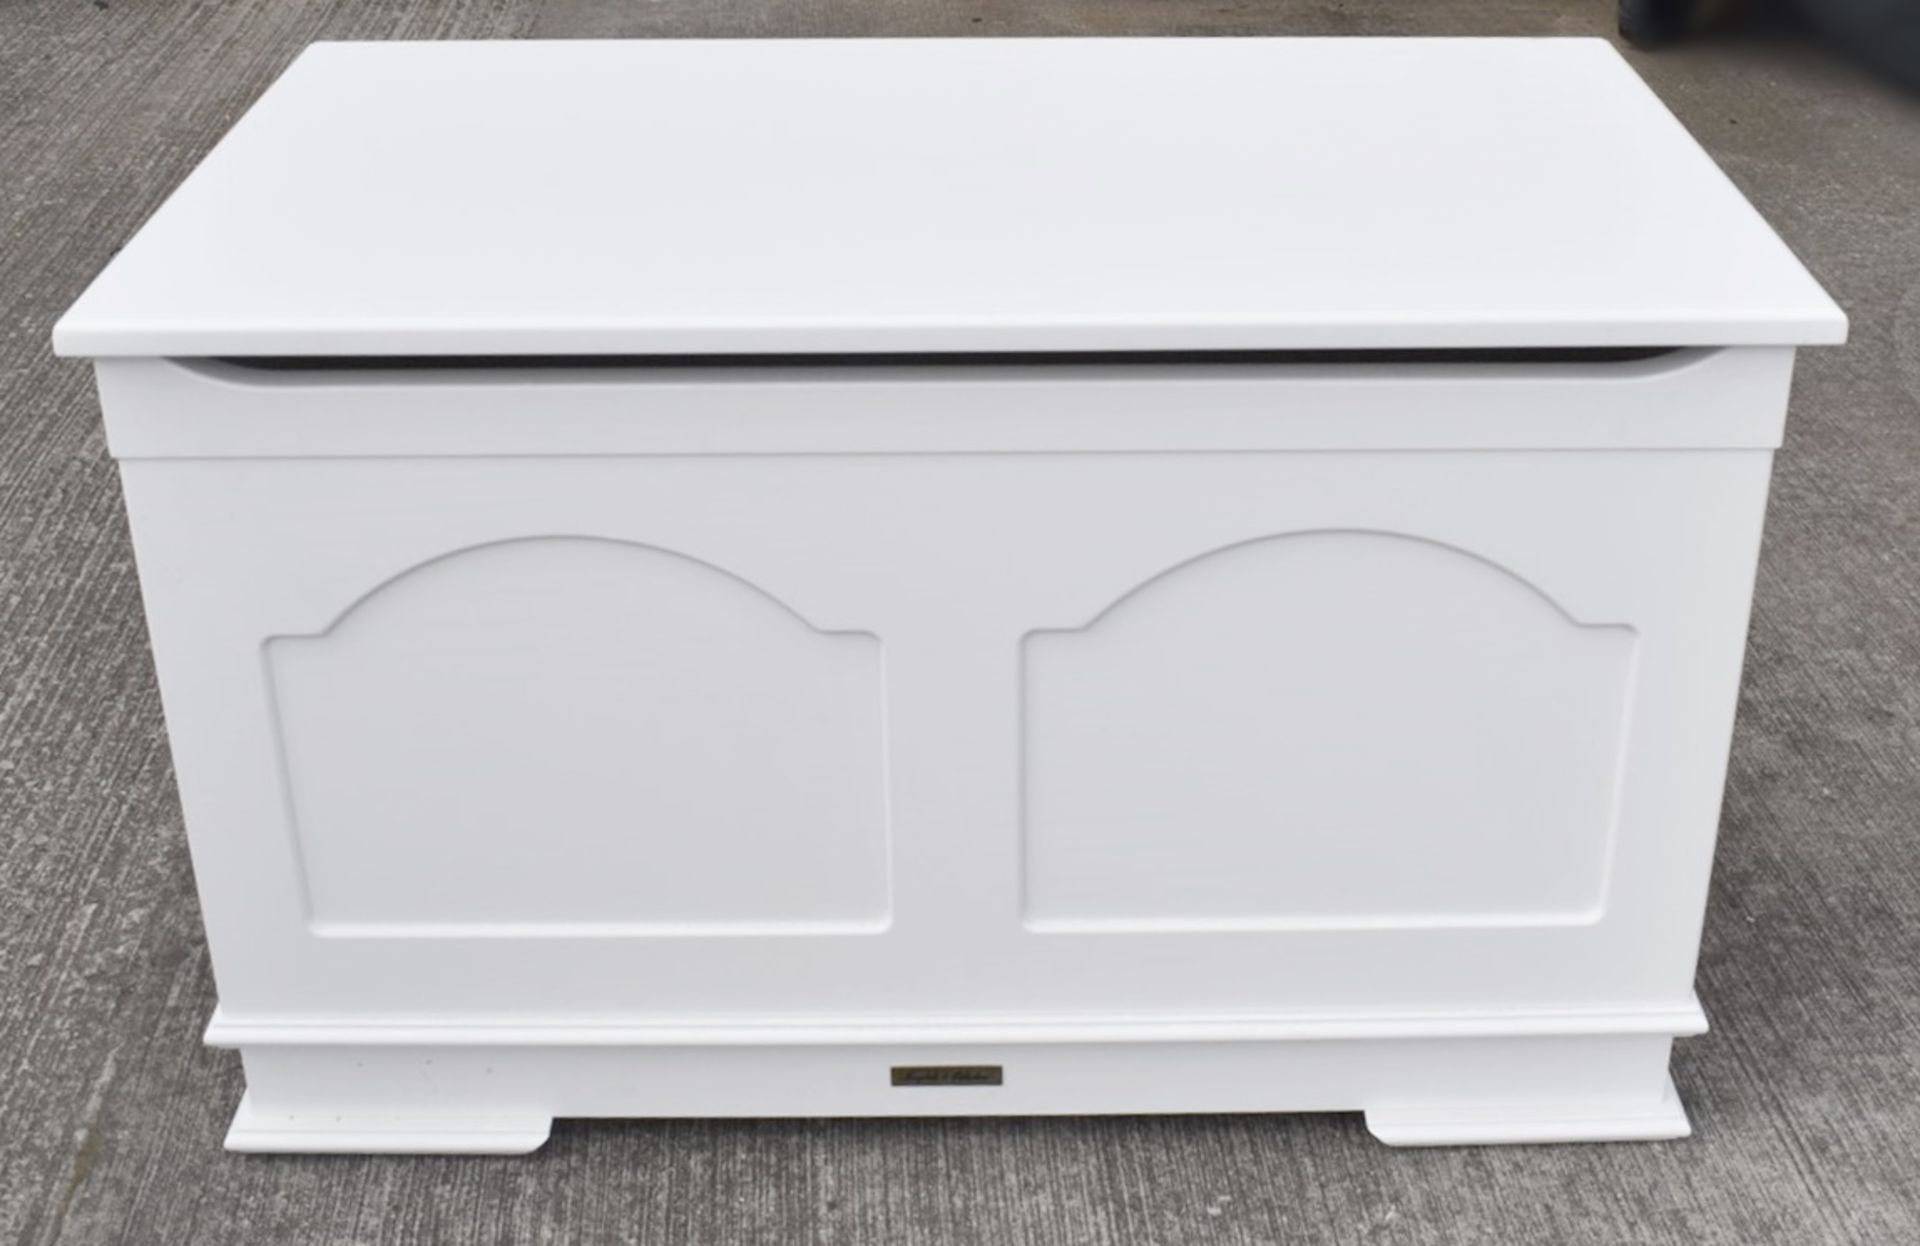 1 x Large 'Théophile & Patachou' Traditional-style Wooden Toy Box in White  - Ex-Display